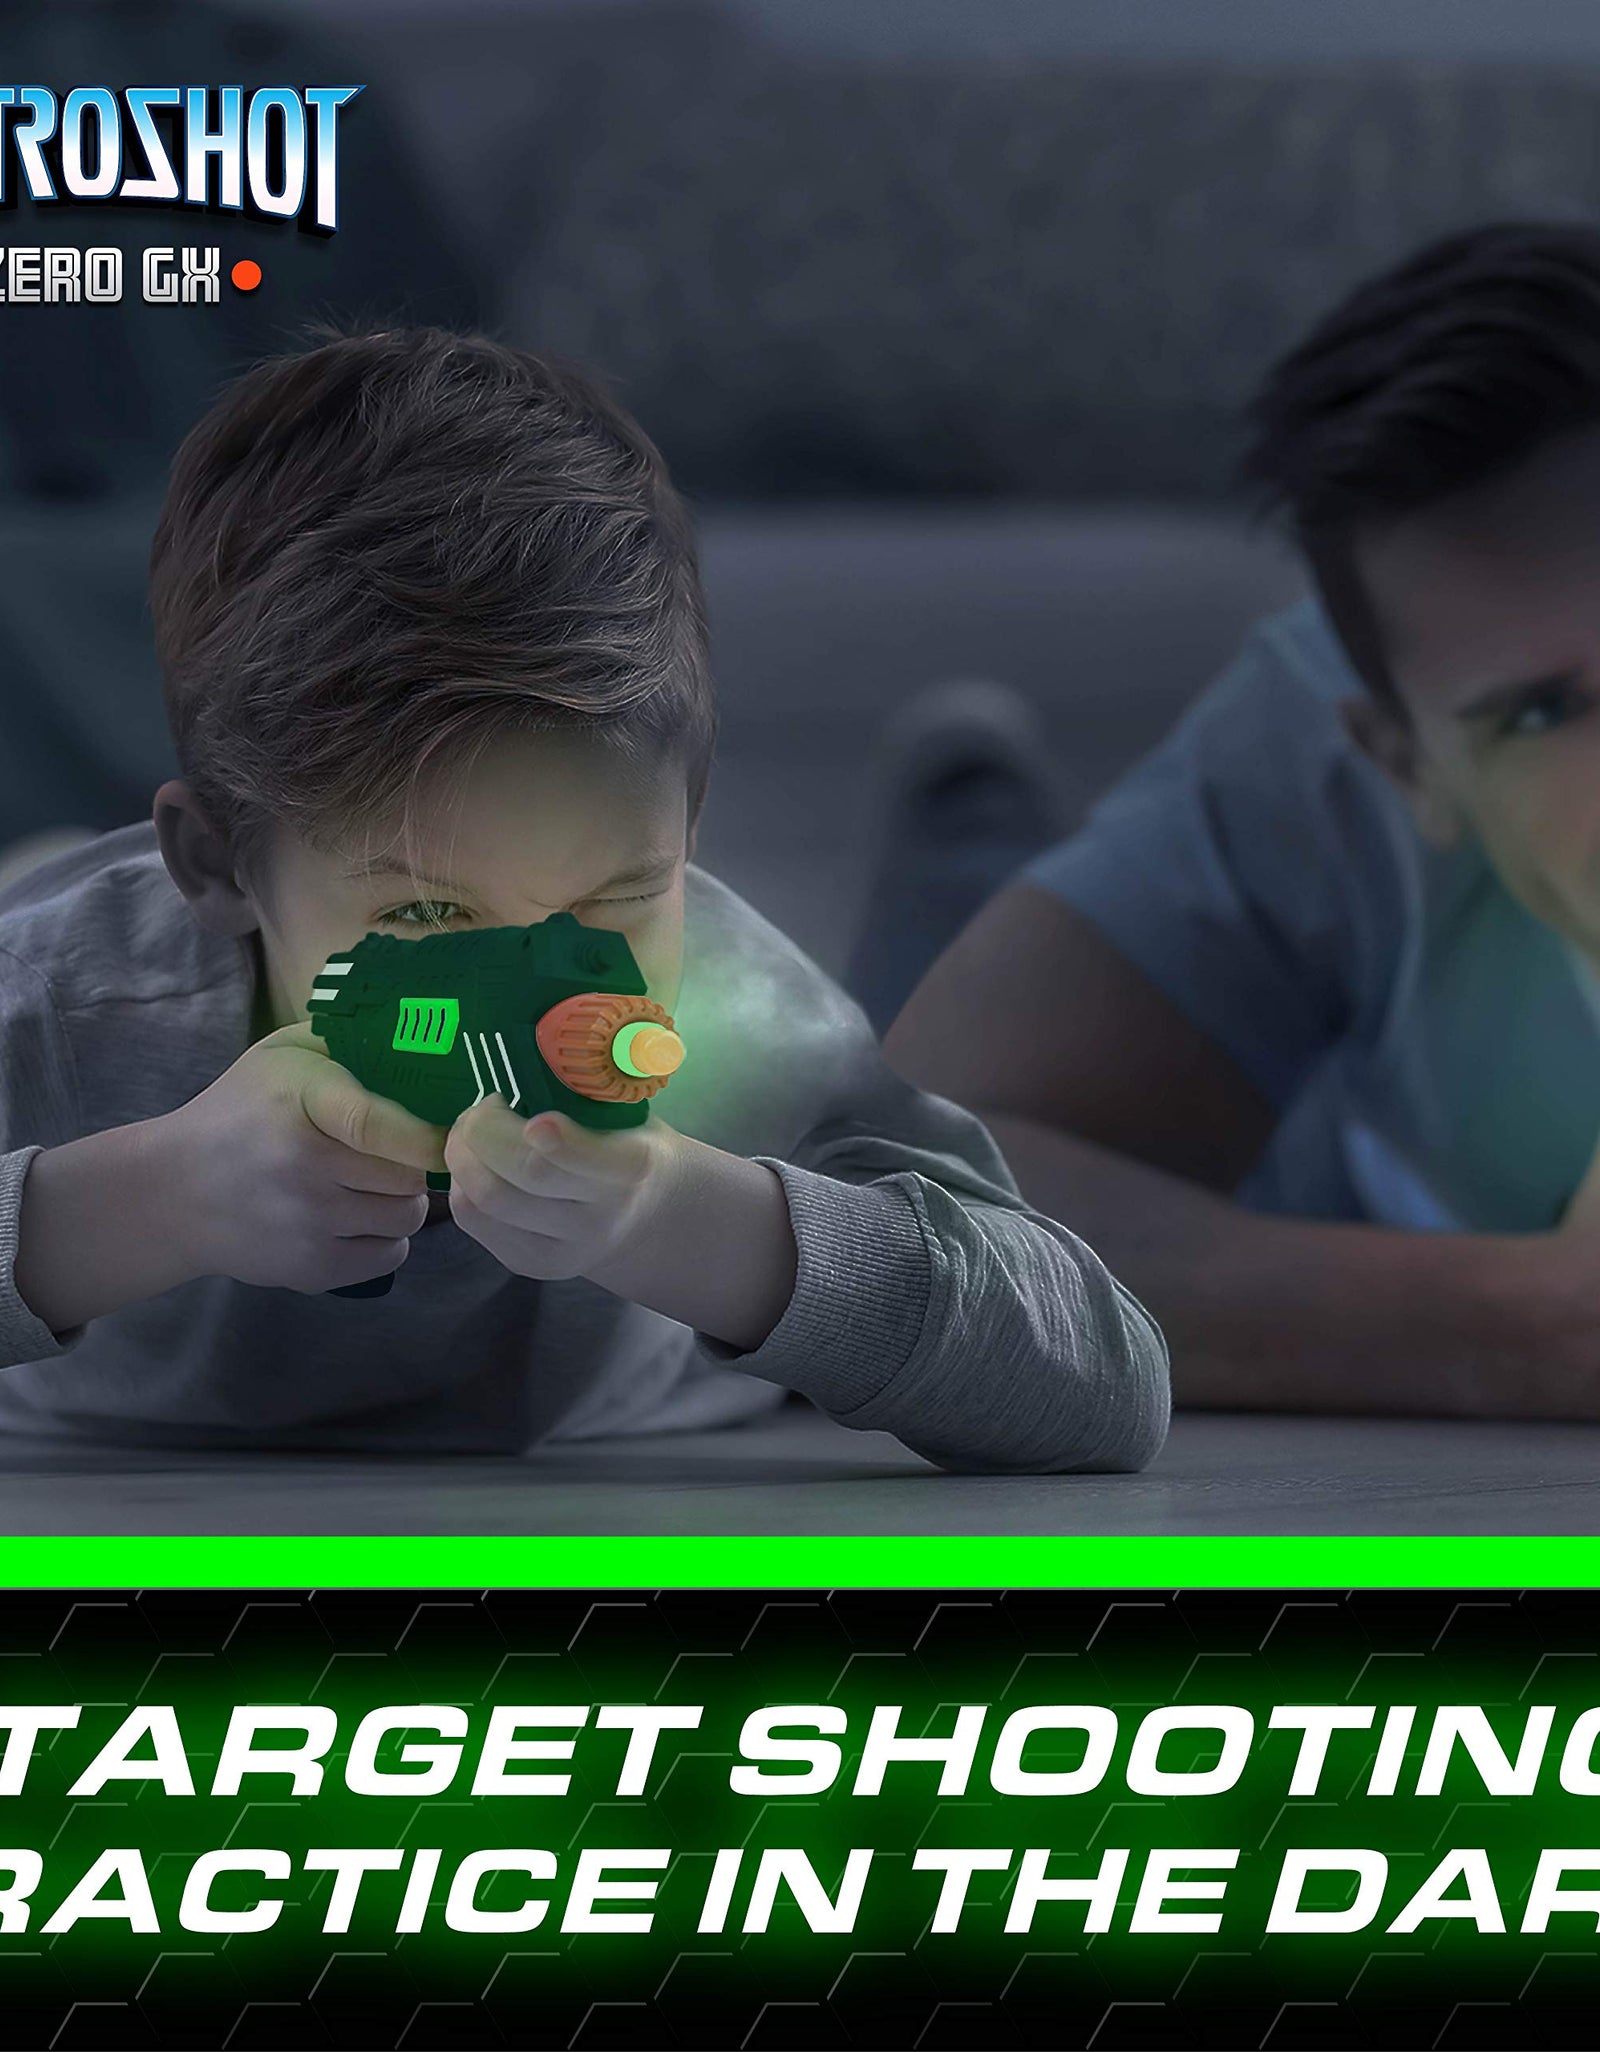 USA Toyz Astroshot Zero GX Glow in The Dark Shooting Games for Kids - Nerf Compatible Floating Ball Targets for Shooting with 1 Foam Blaster Toy Gun, 10 Floating Ball Targets, and 5 Flip Targets